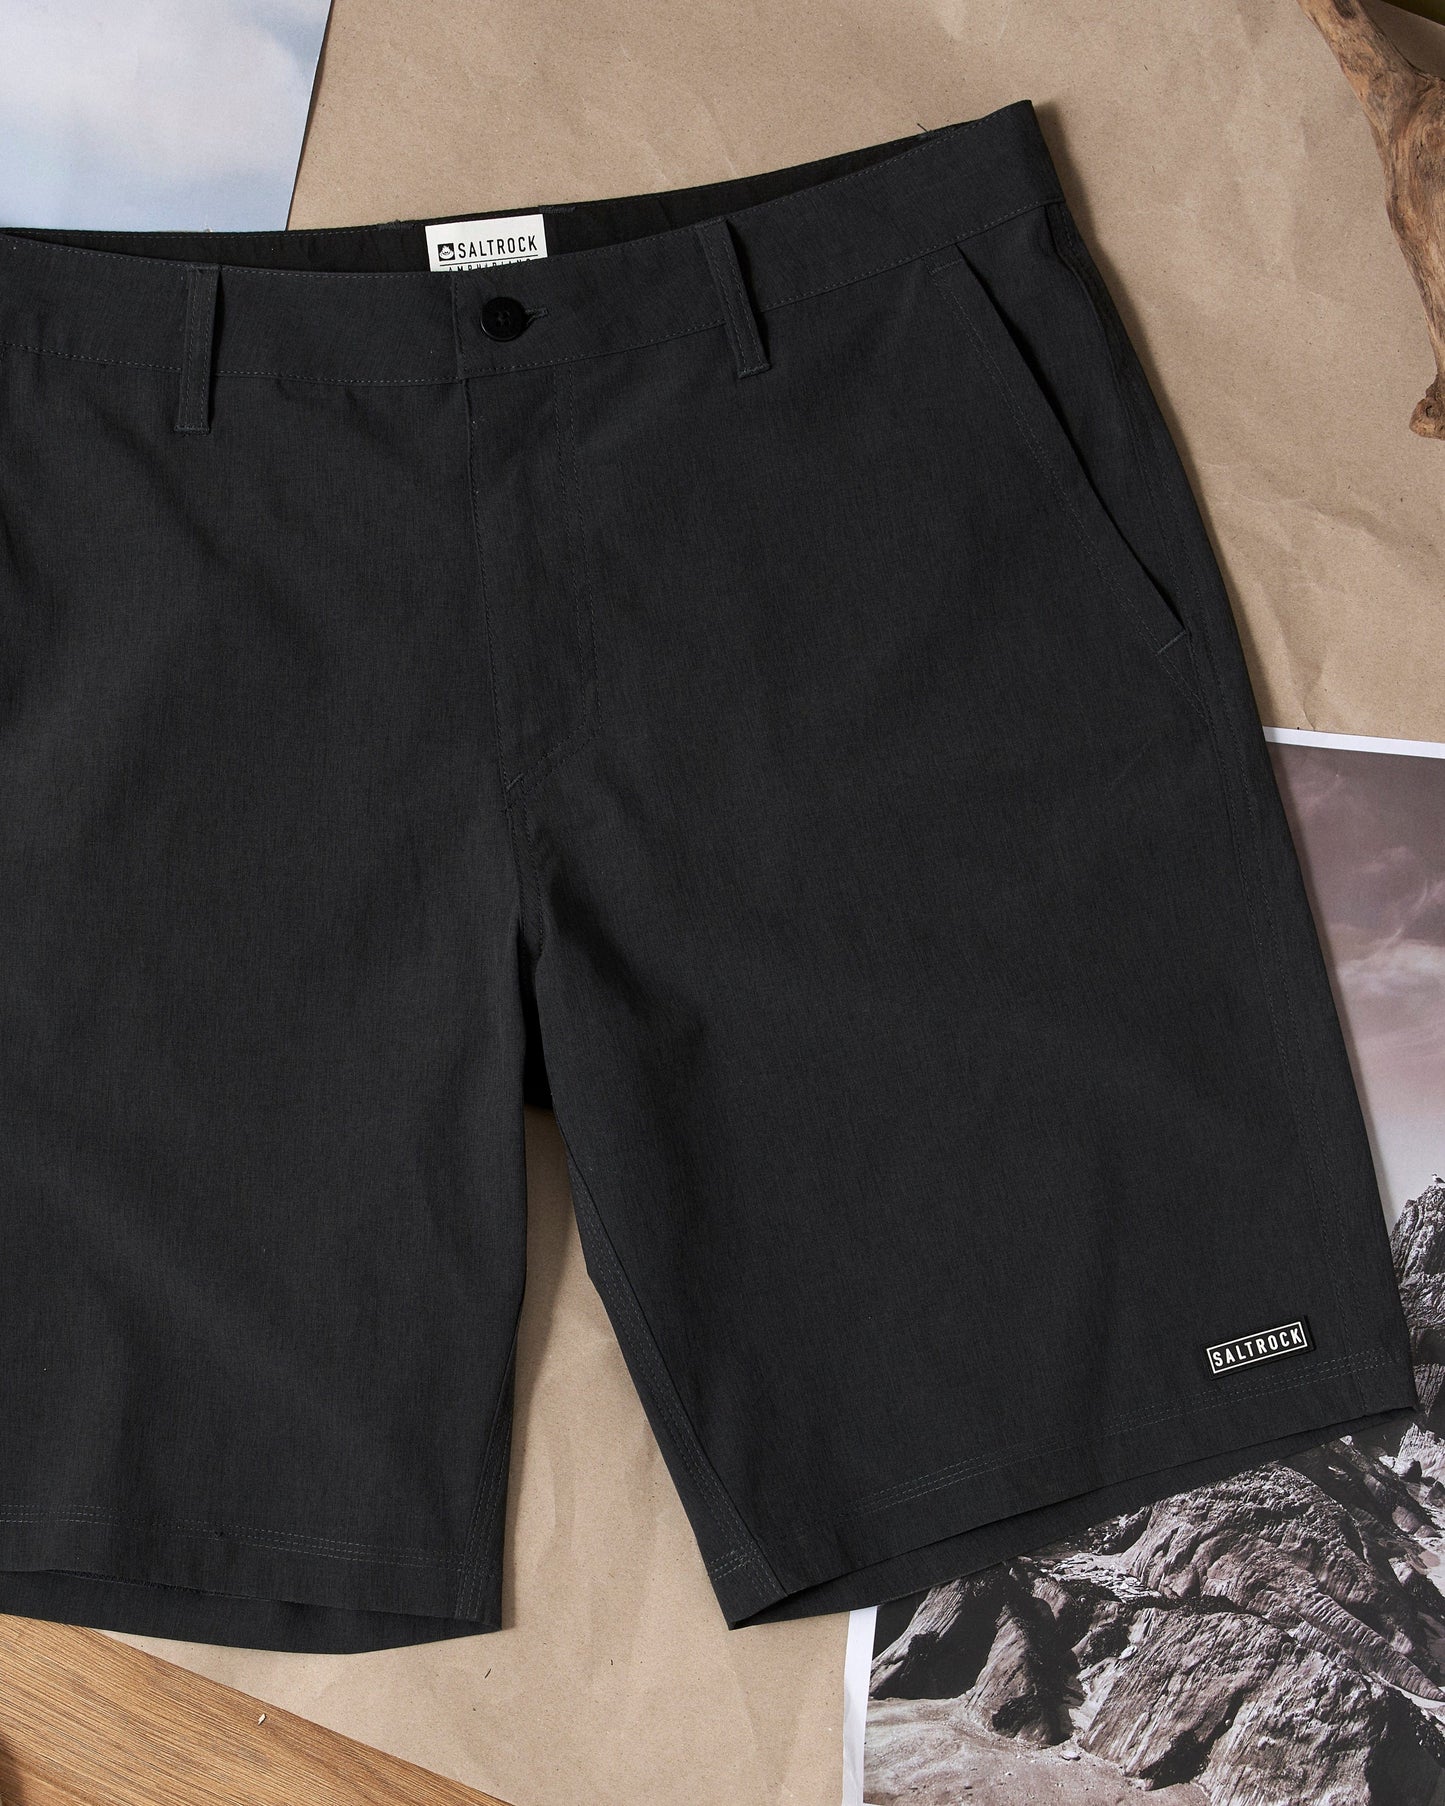 The Saltrock Amphibian 2 - Mens Hybrid Boardshorts - Black on a wooden table are machine washable.